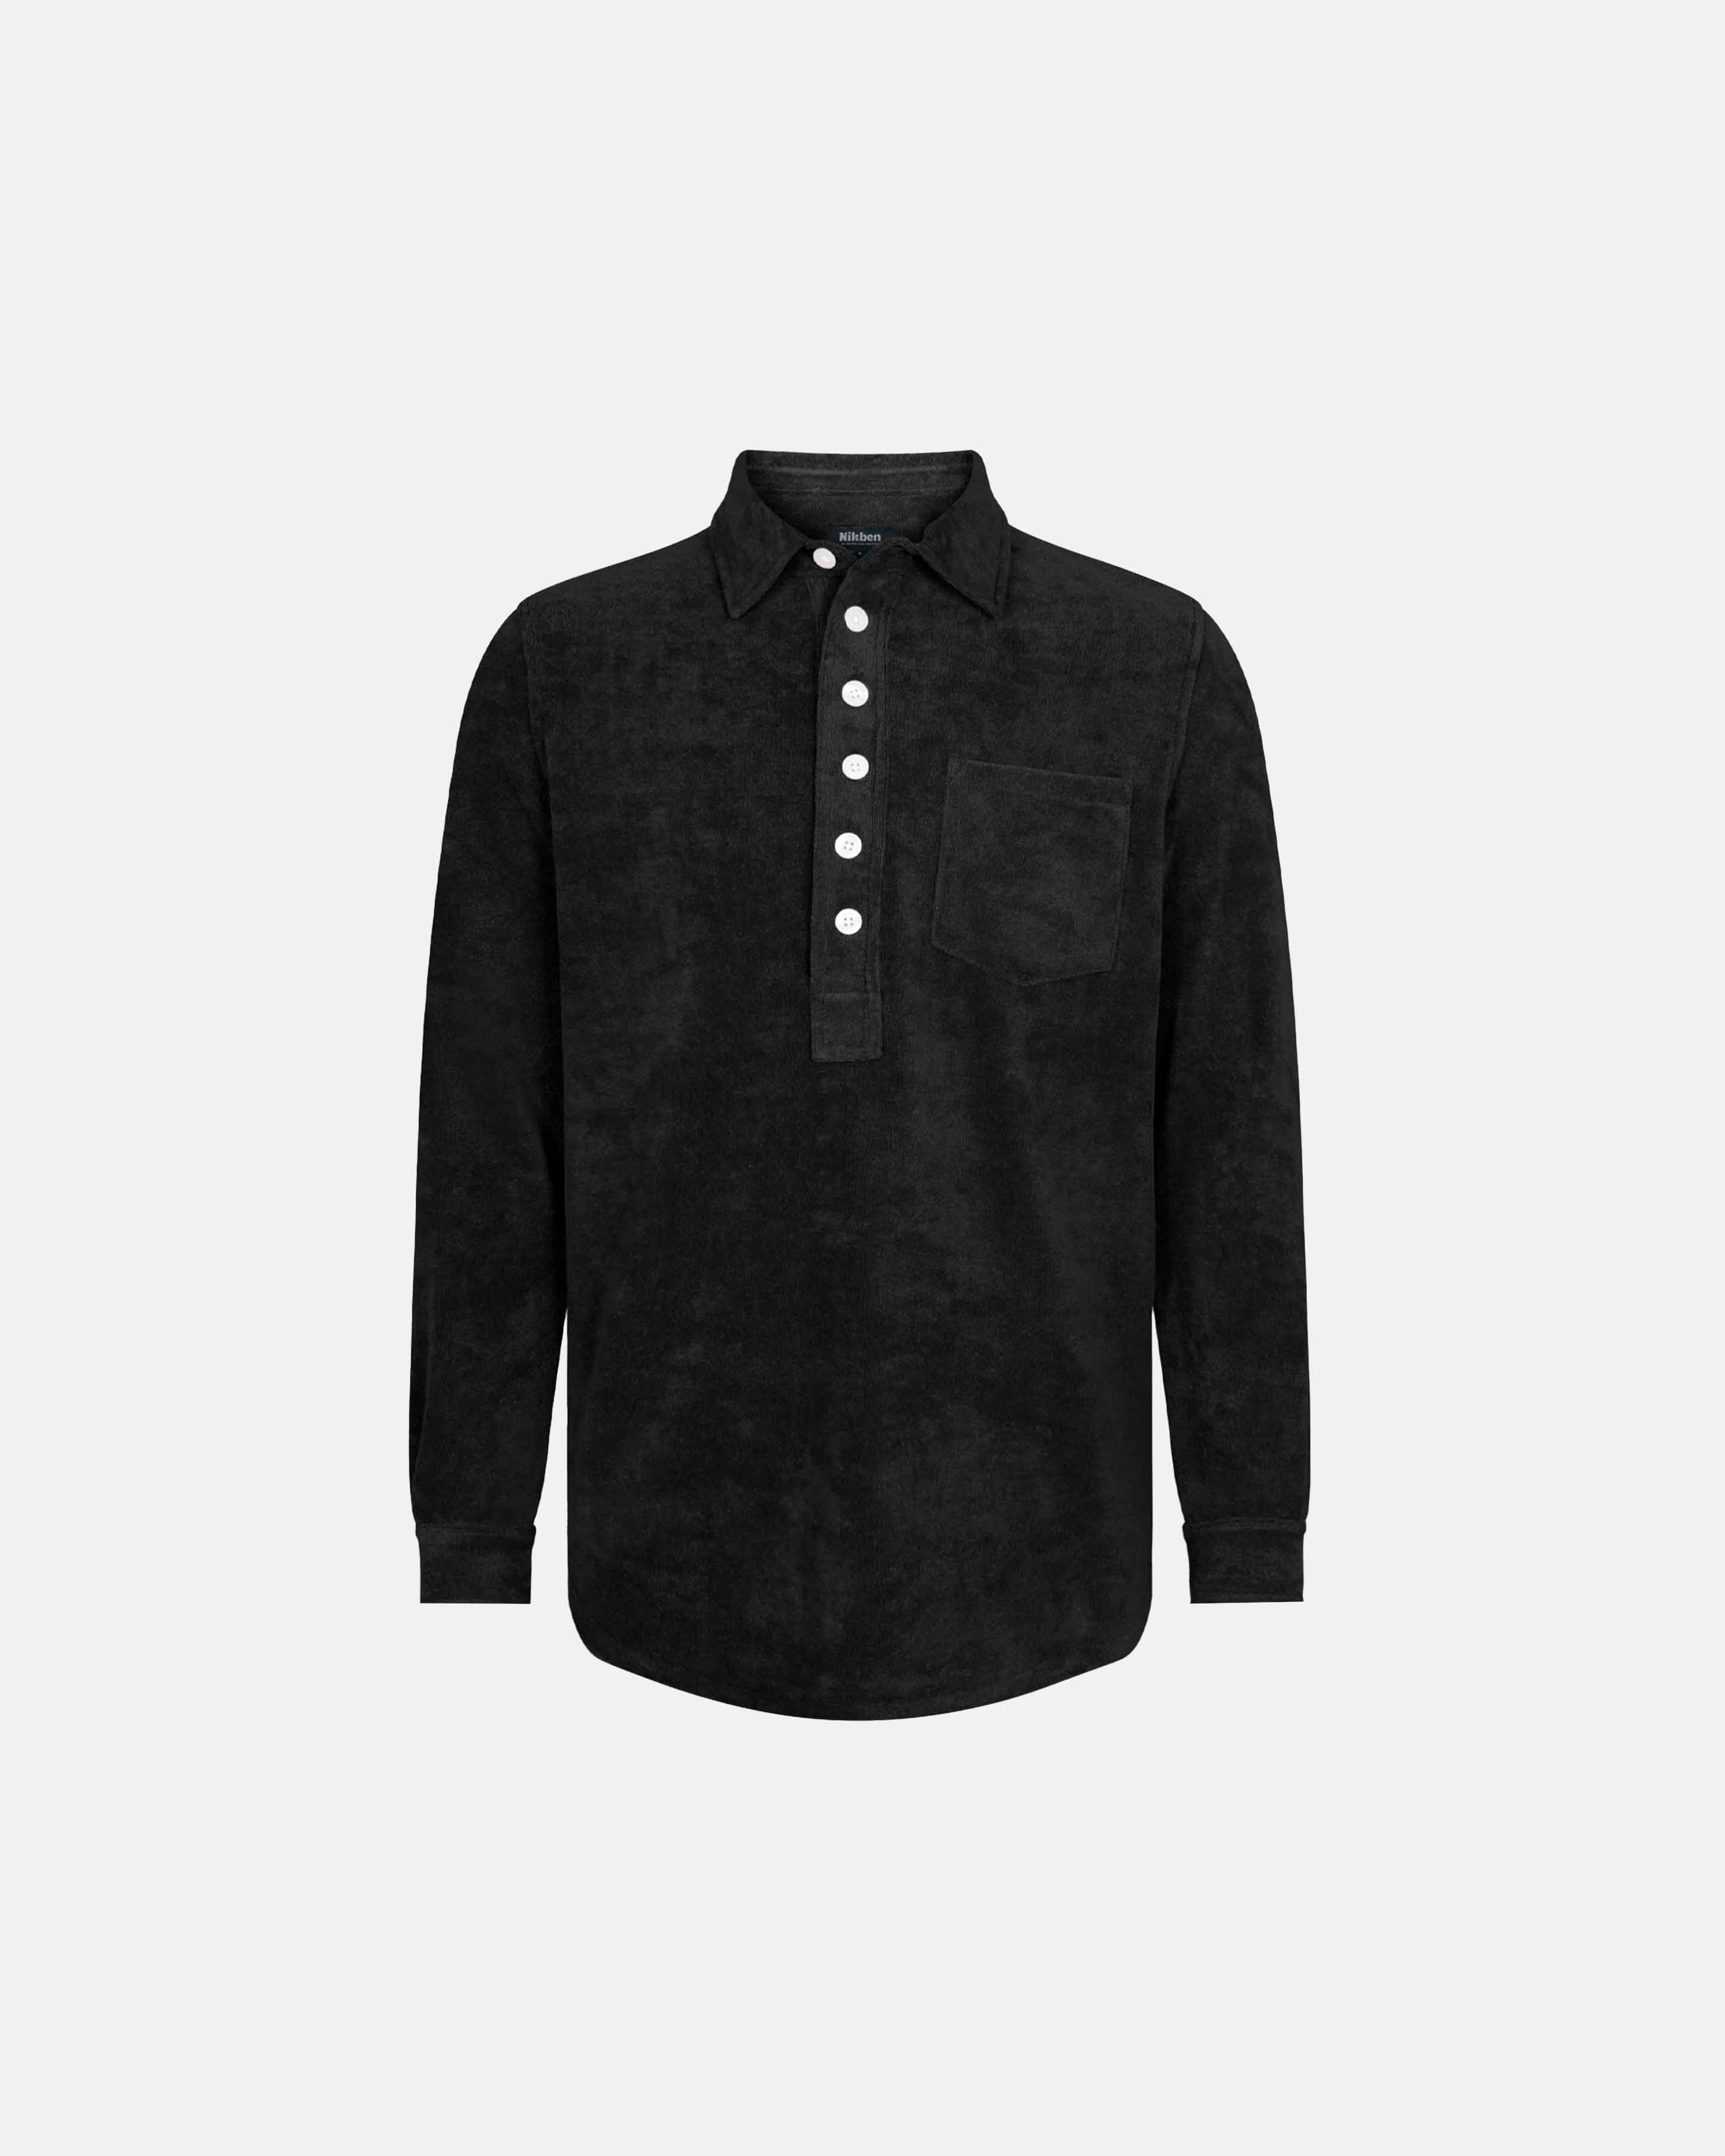 Black long sleeve shirt in terry toweling fabric with half button closure and one chest pocket